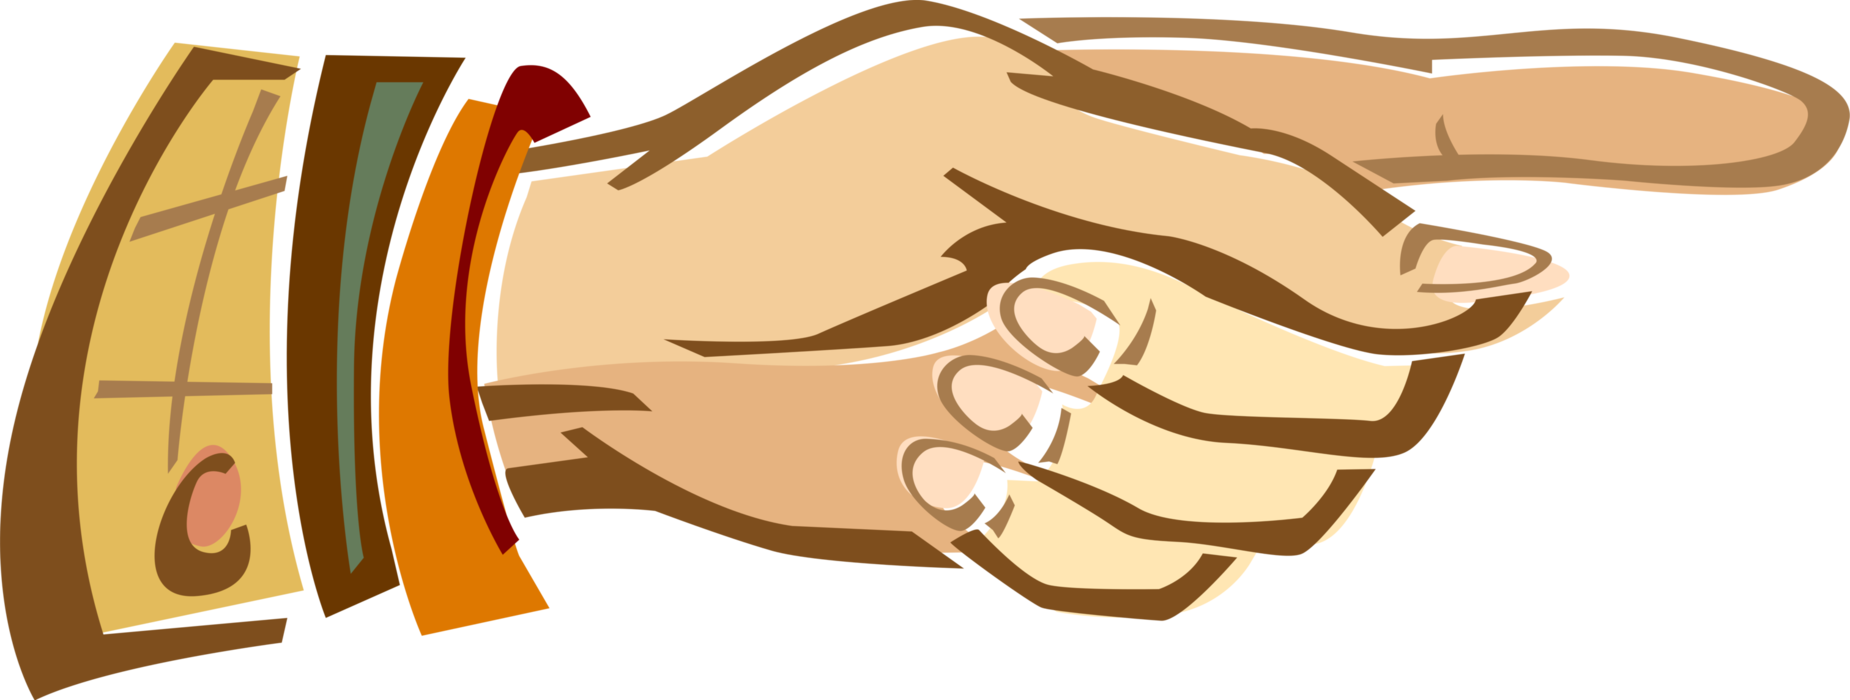 Vector Illustration of Hand and Pointing Finger